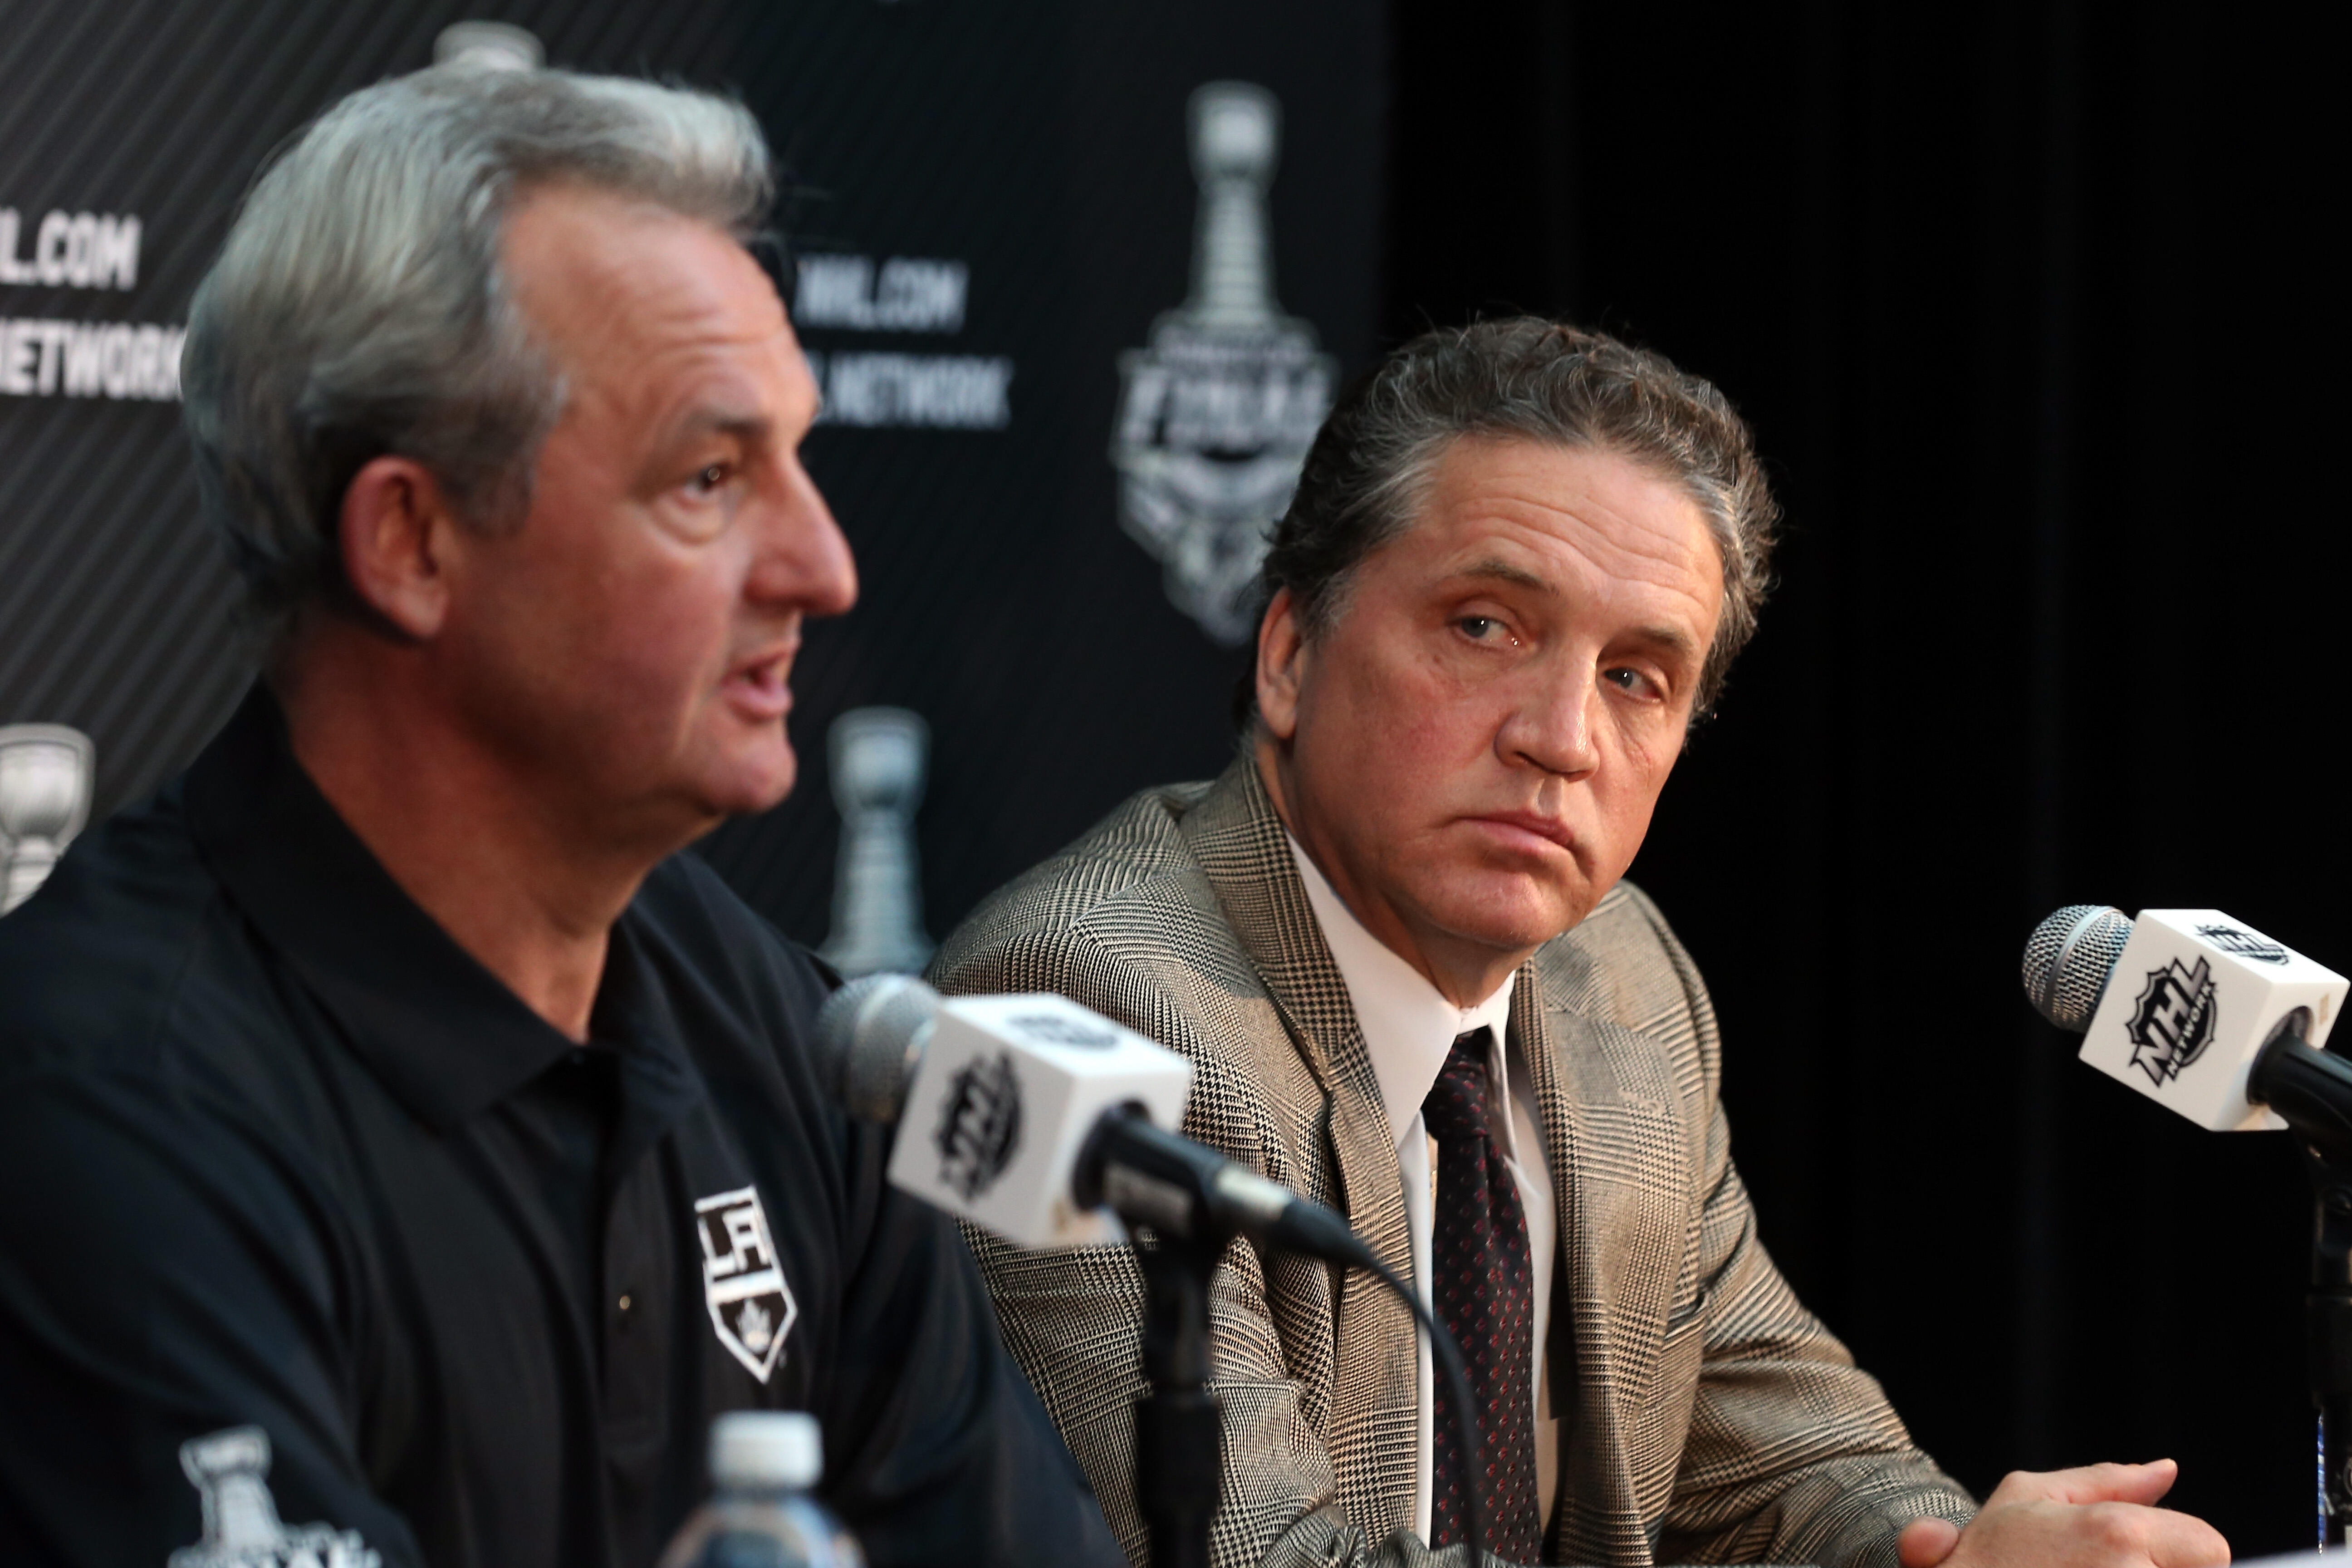 LOS ANGELES, CA - JUNE 03:  Head Coach Darryl Sutter and President and General Manager Dean Lombardi of the Los Angeles Kings speak during Media Day for the 2014 NHL Stanley Cup Final at Staples Center on June 3, 2014 in Los Angeles, California.  (Photo b